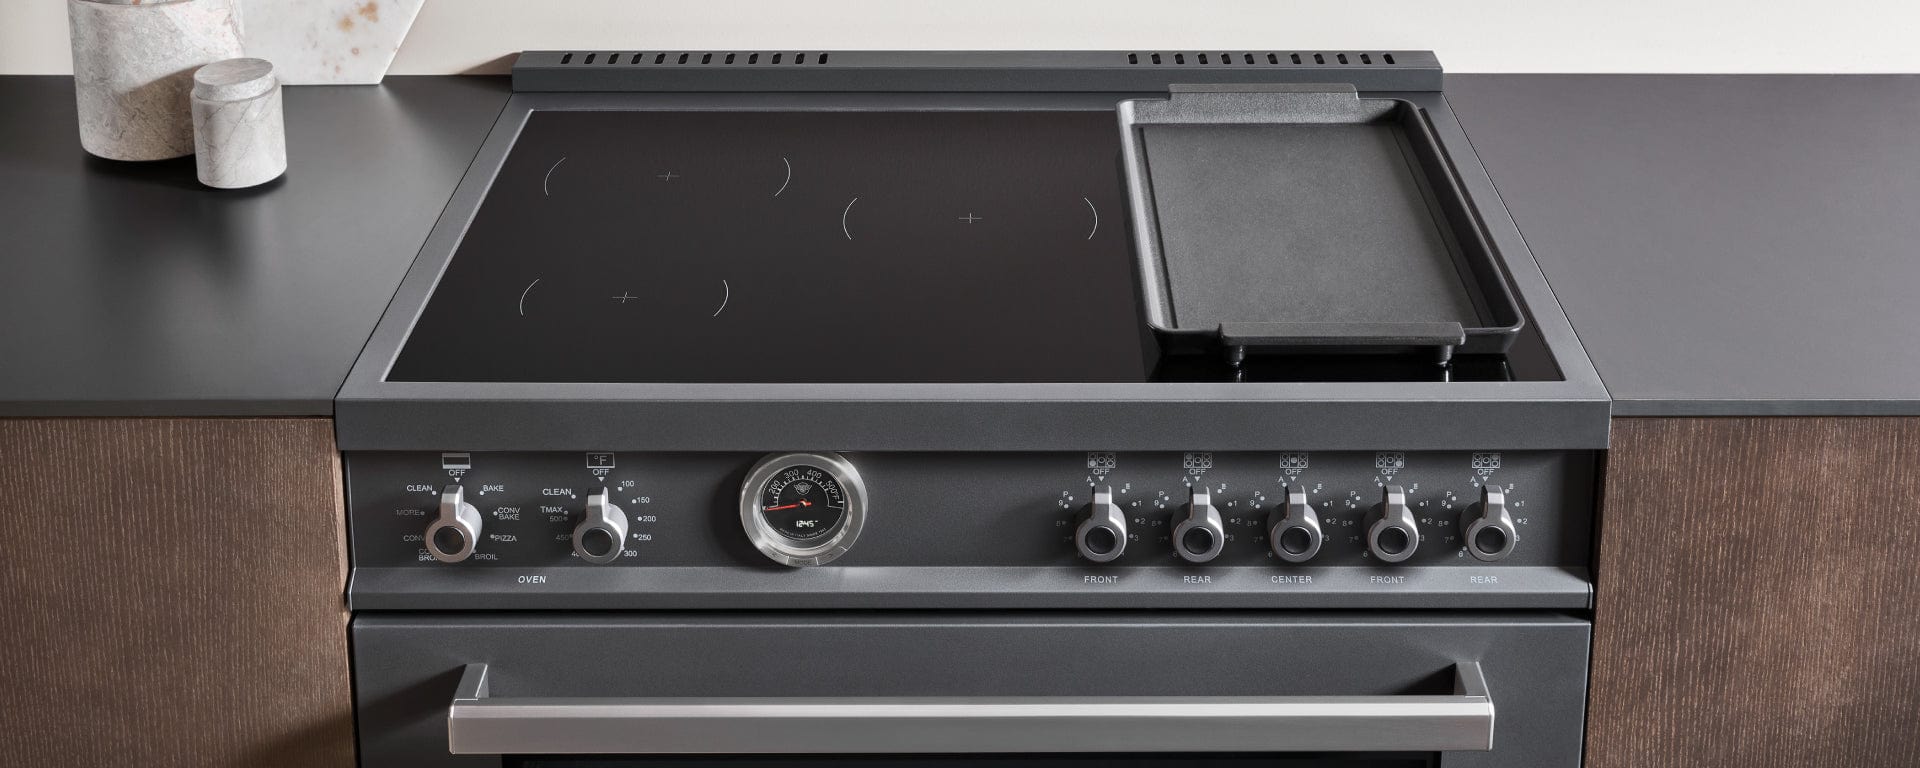 Bertazzoni Professional Series 36" 5 Heating Zones Carbonio Freestanding Induction Range With 5.7 Cu.Ft. Electric Self-Clean Oven and Cast Iron Griddle PRO365ICFEPCAT Luxury Appliances Direct